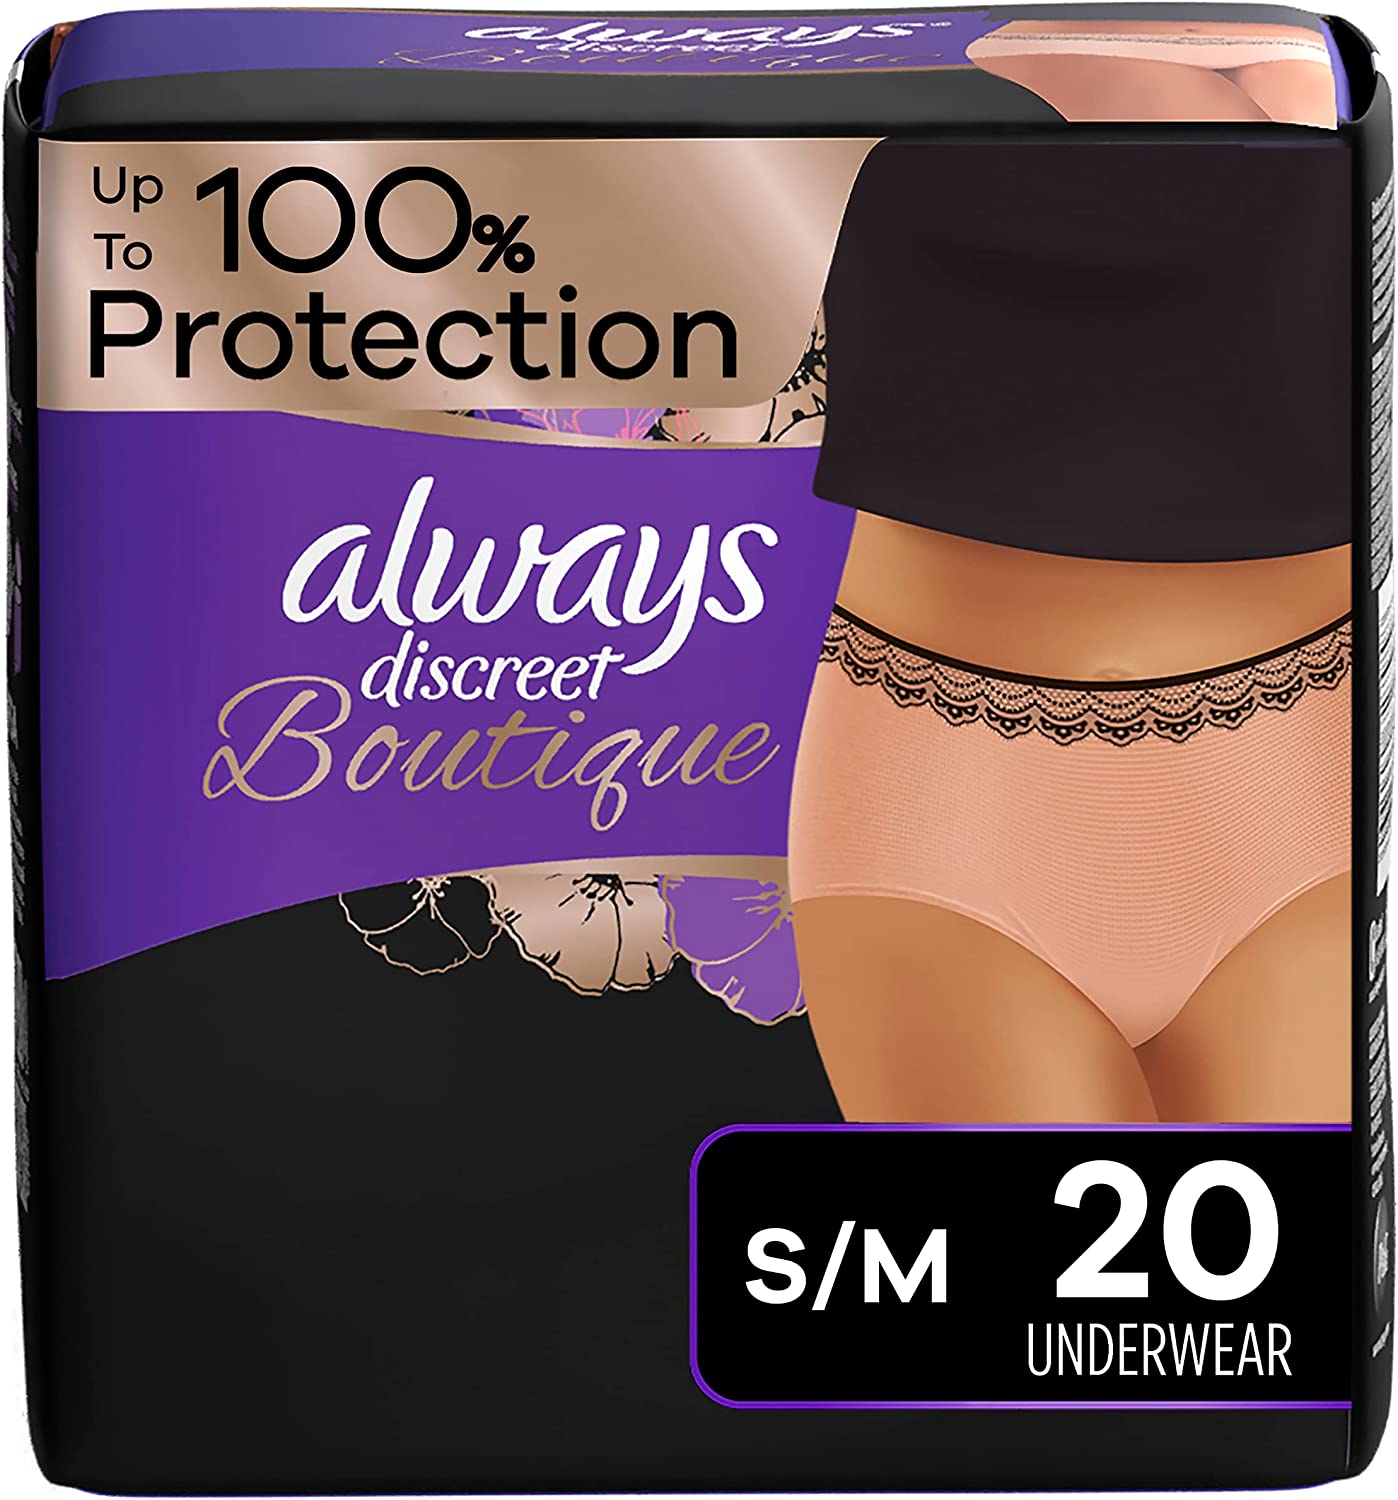 Always Discreet Boutique, Incontinence & Postpartum Underwear For Women, High-Rise, Size Small/Medium, Rosy, Maximum Absorbency, Disposable, 20 Count